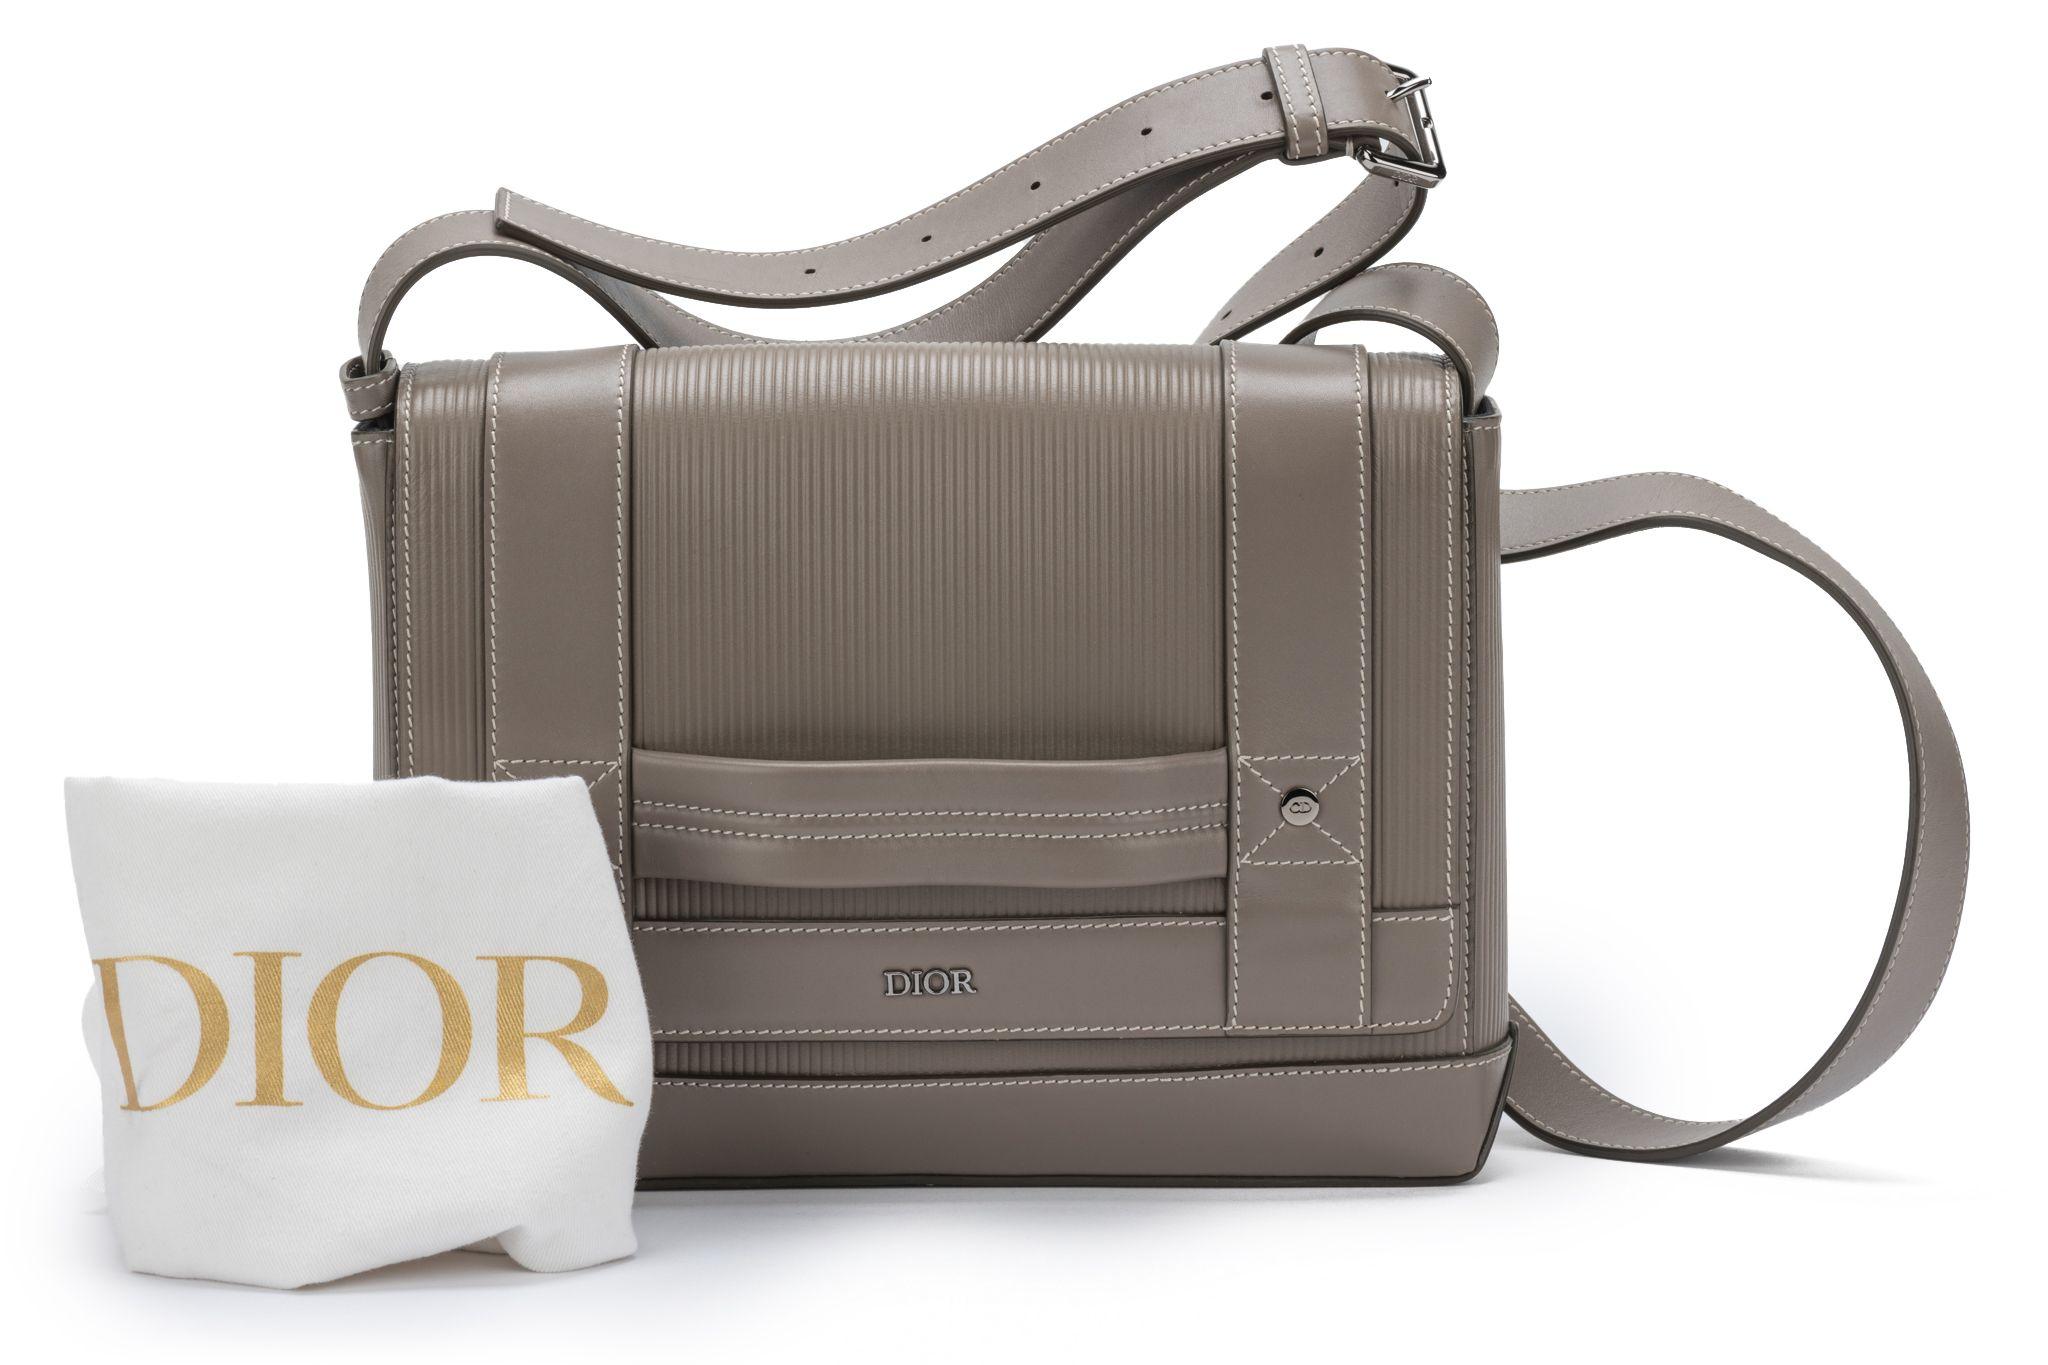 Dior New Messenger Bag in Taupe For Sale 8